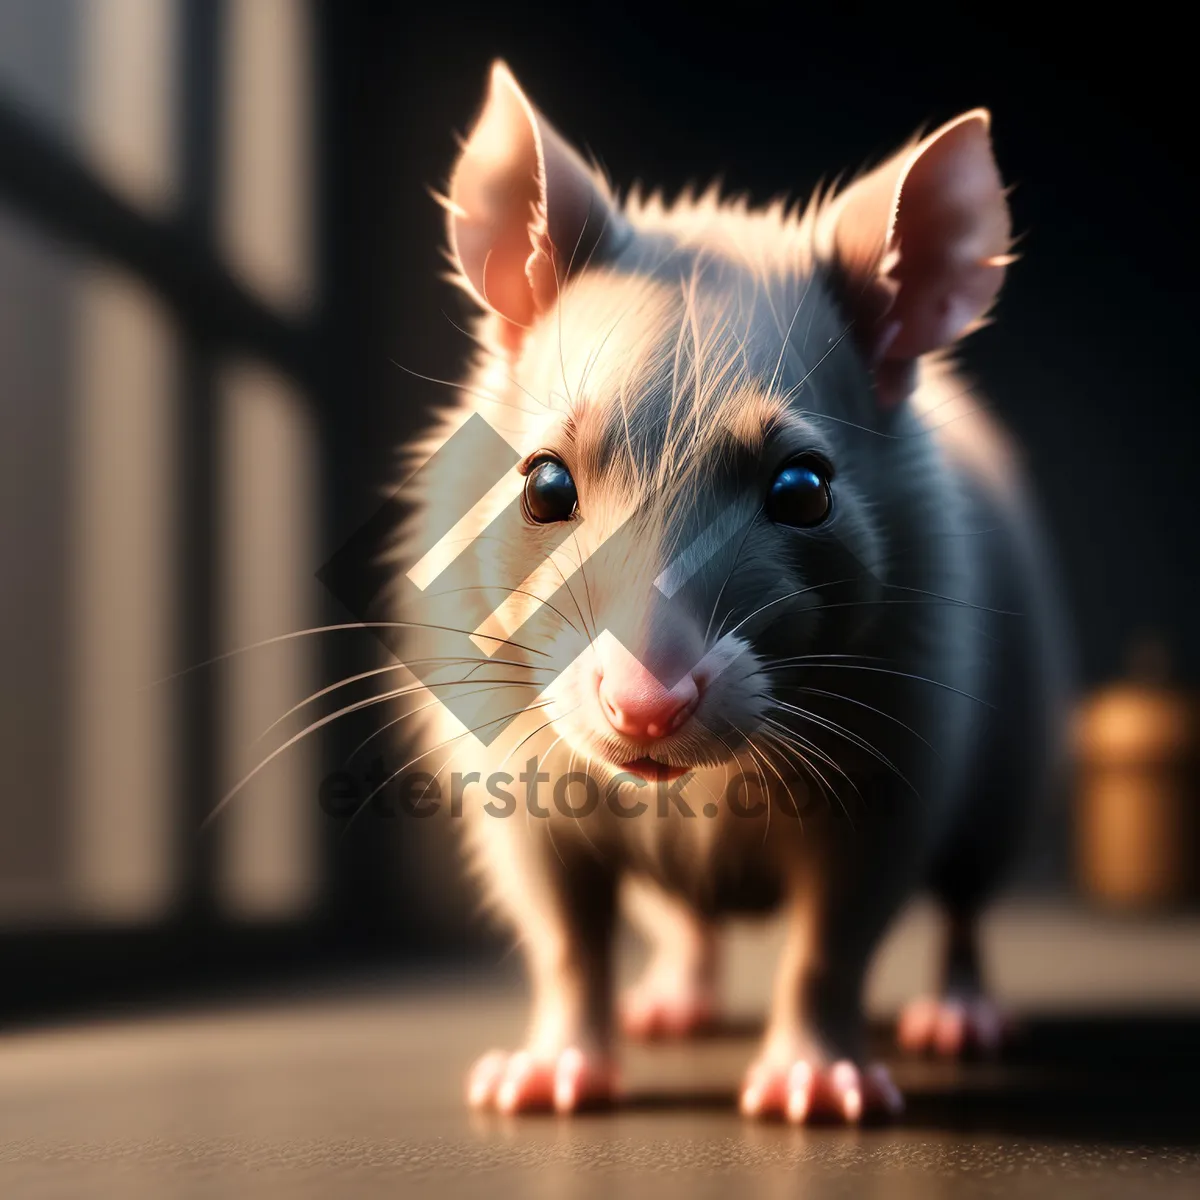 Picture of Adorable Gray Mouse with Fluffy Fur and Whiskers